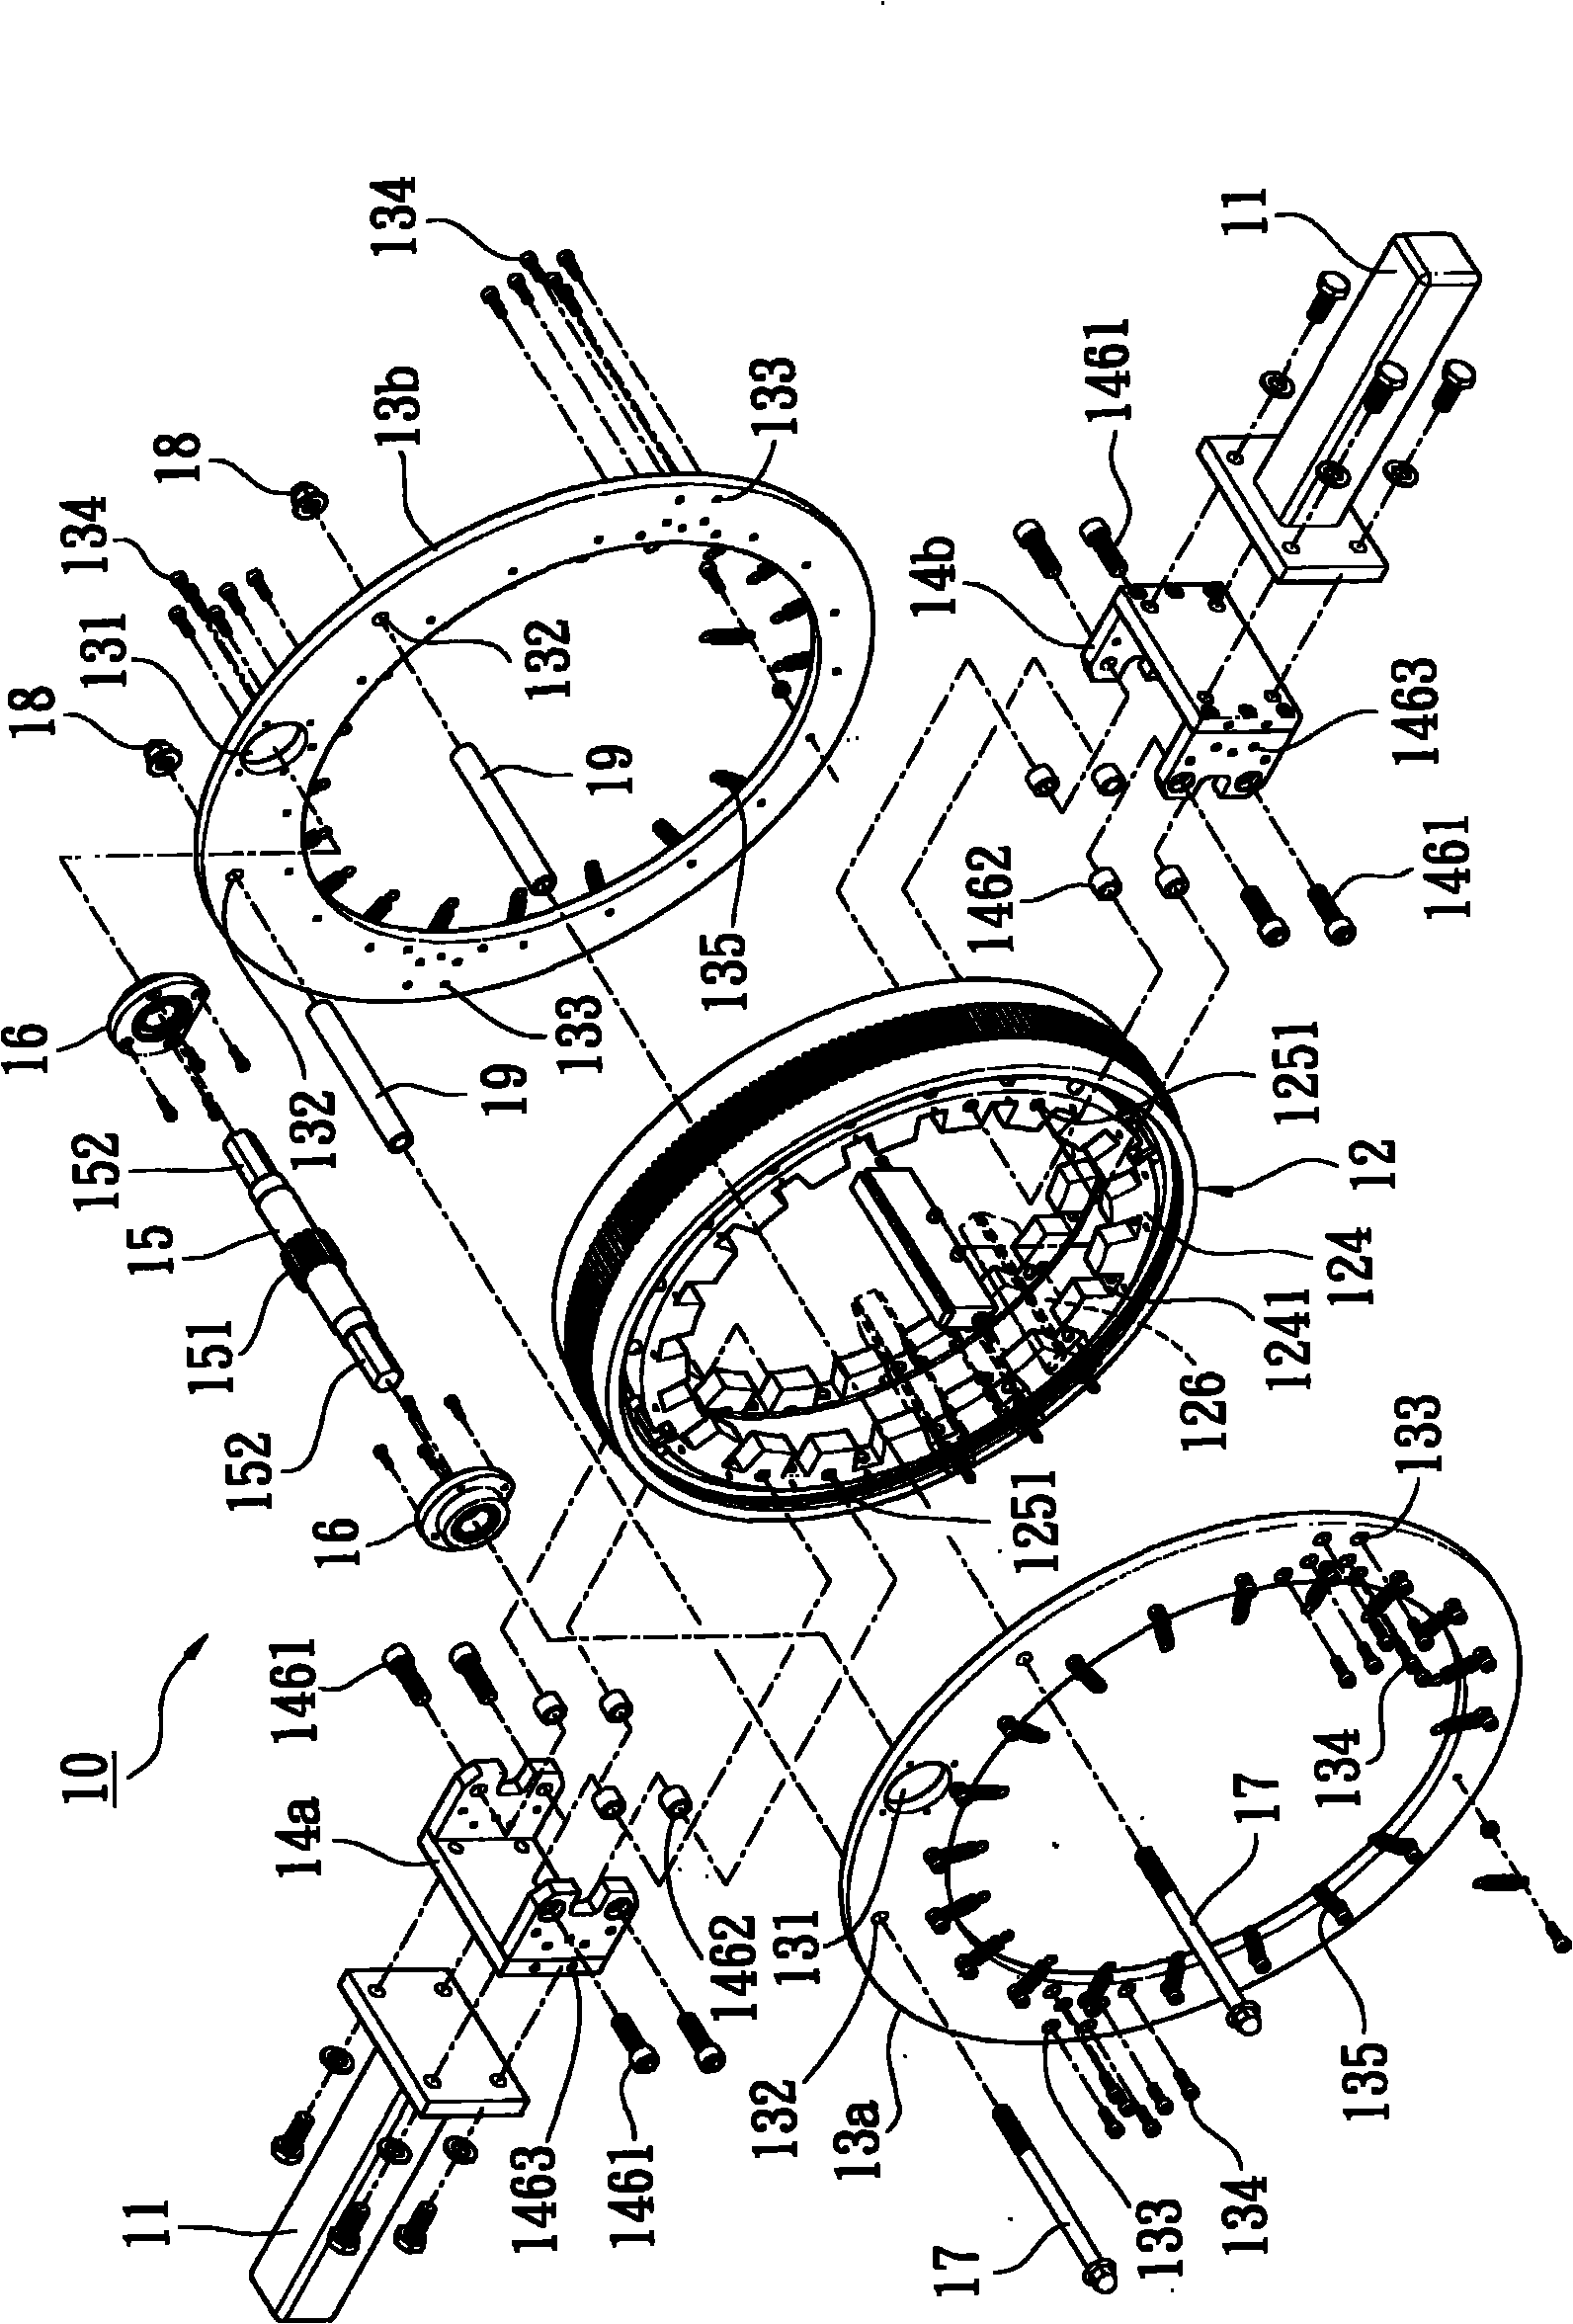 Multi-claw type external diameter grinding device